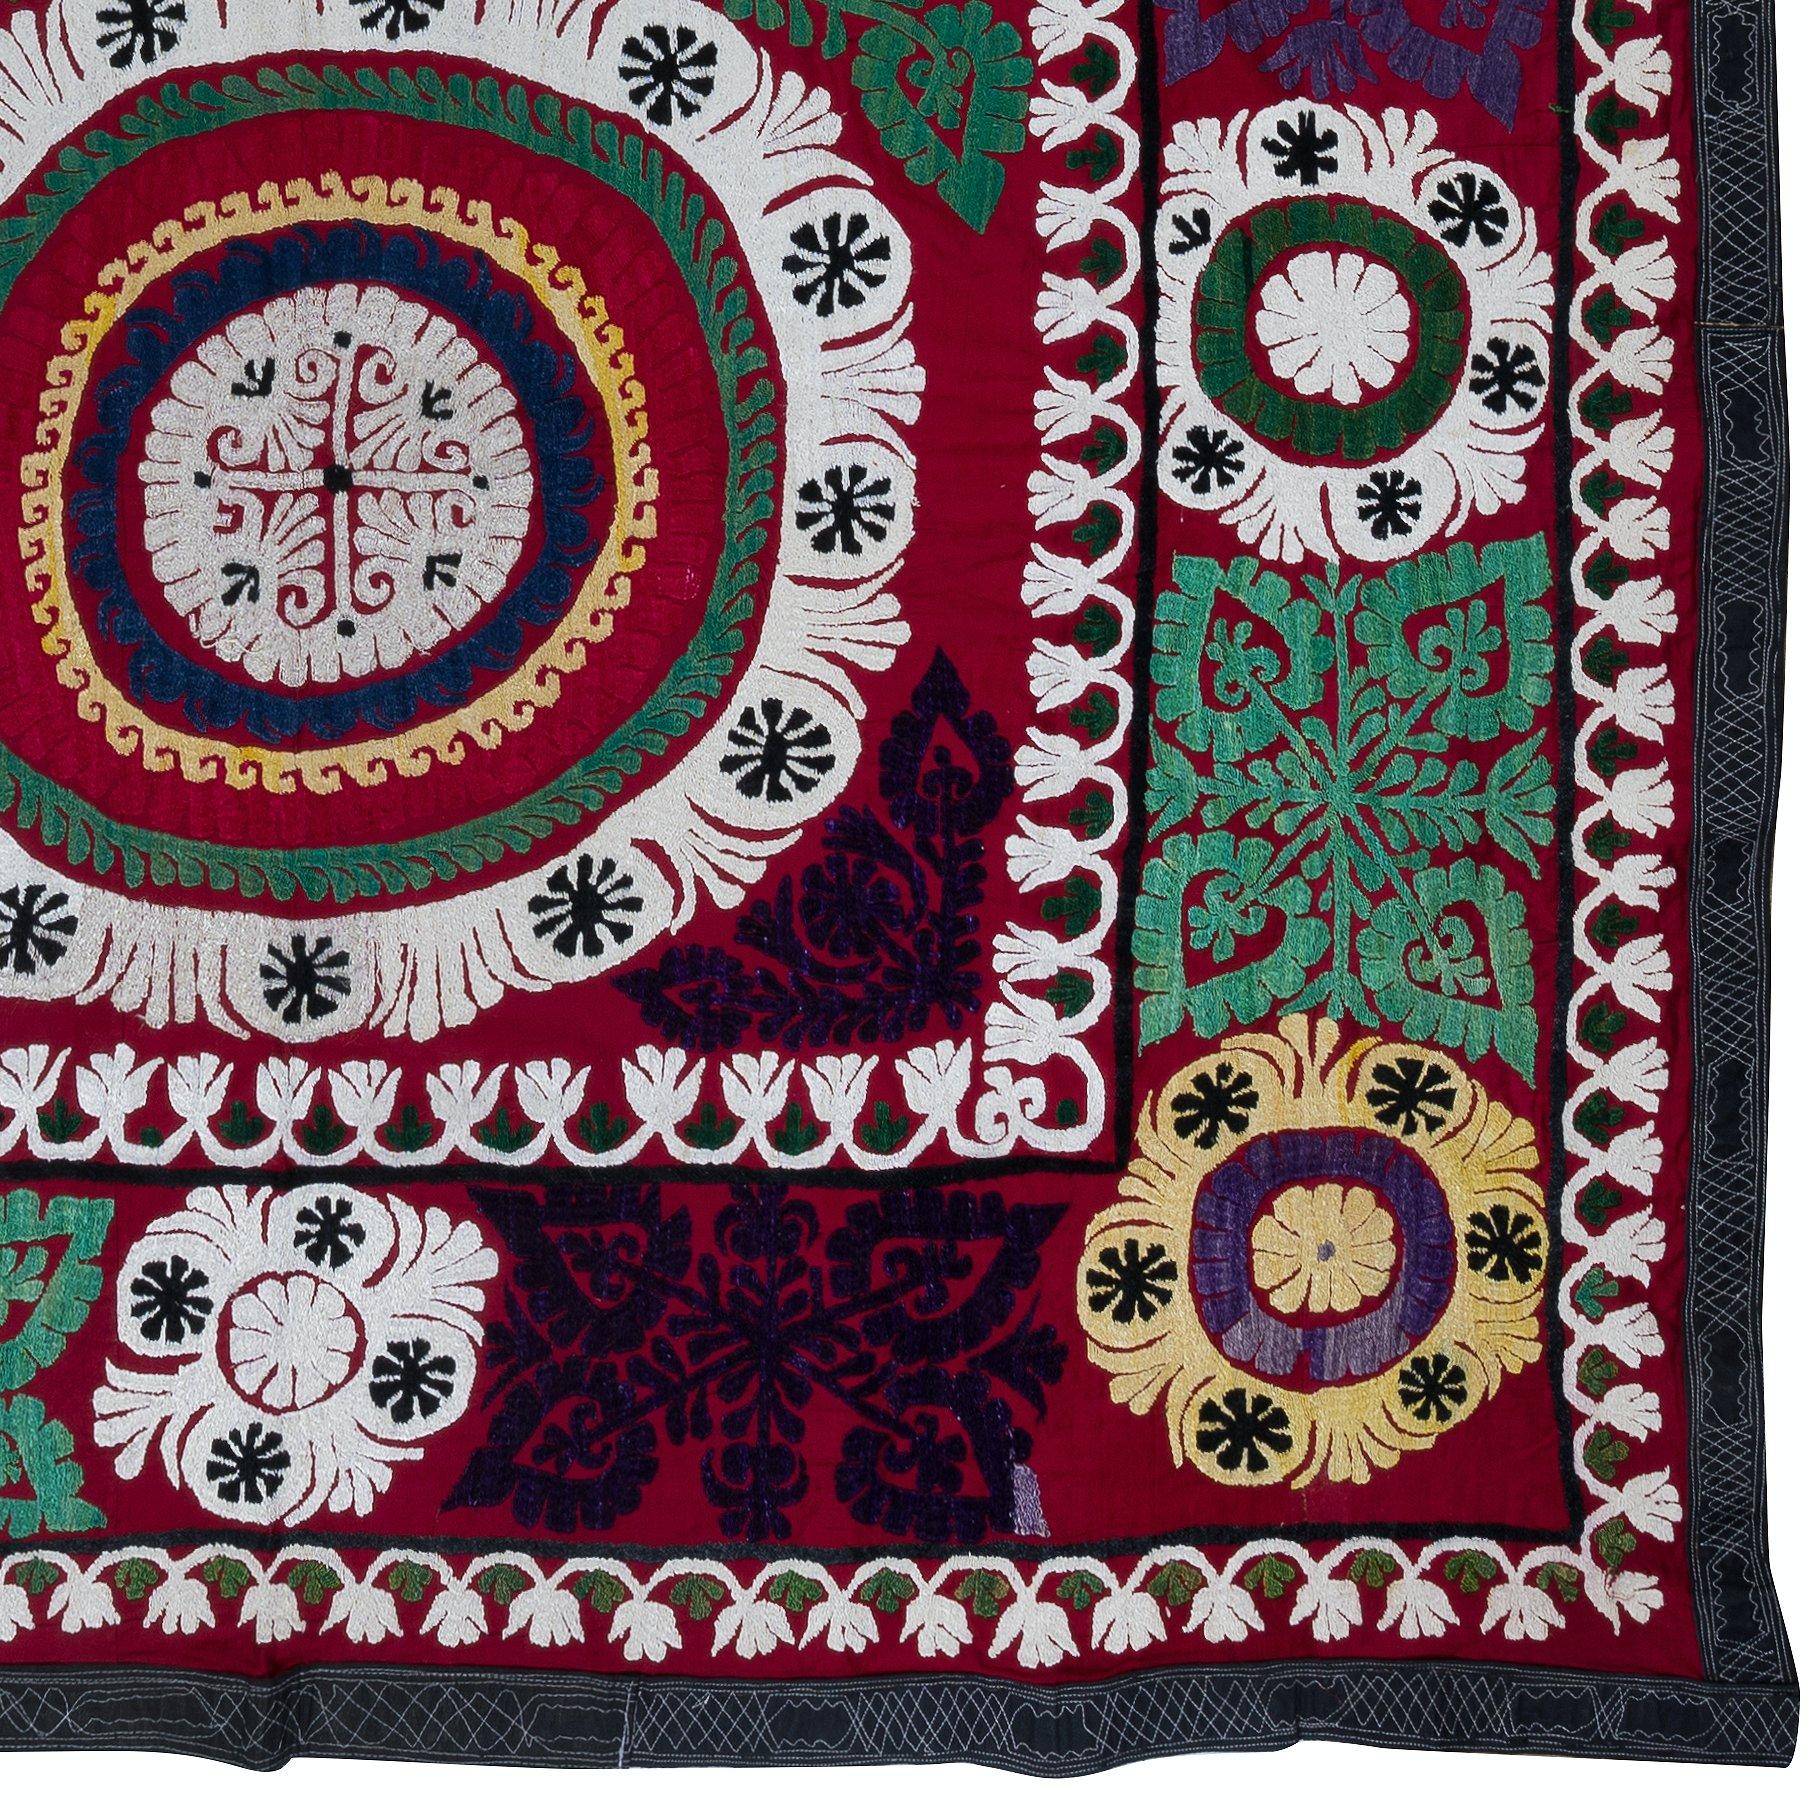 Embroidered 5.7x7.6 ft Vintage Silk Embroidery Wall Hanging, Colorful Uzbek Suzani Bed Cover For Sale